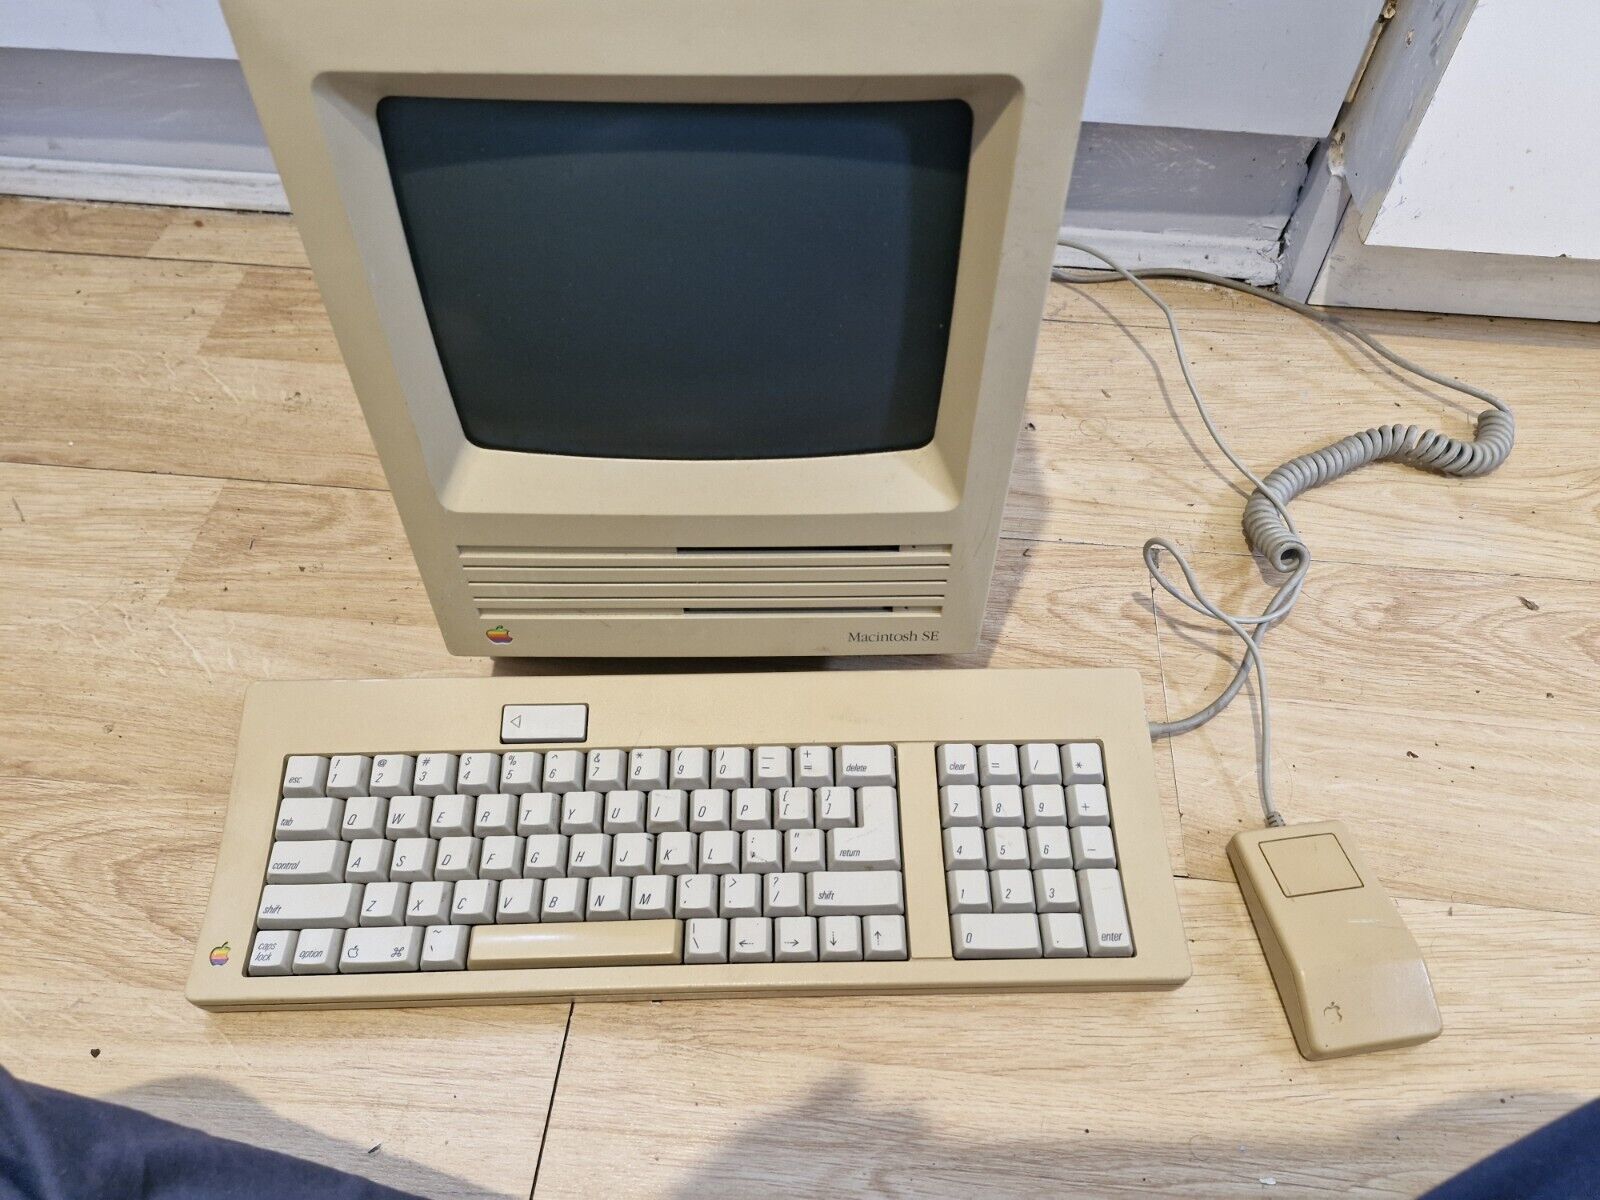  Vintage Apple Macintosh SE - Works Tested Working Keyboard And Mouse Included 